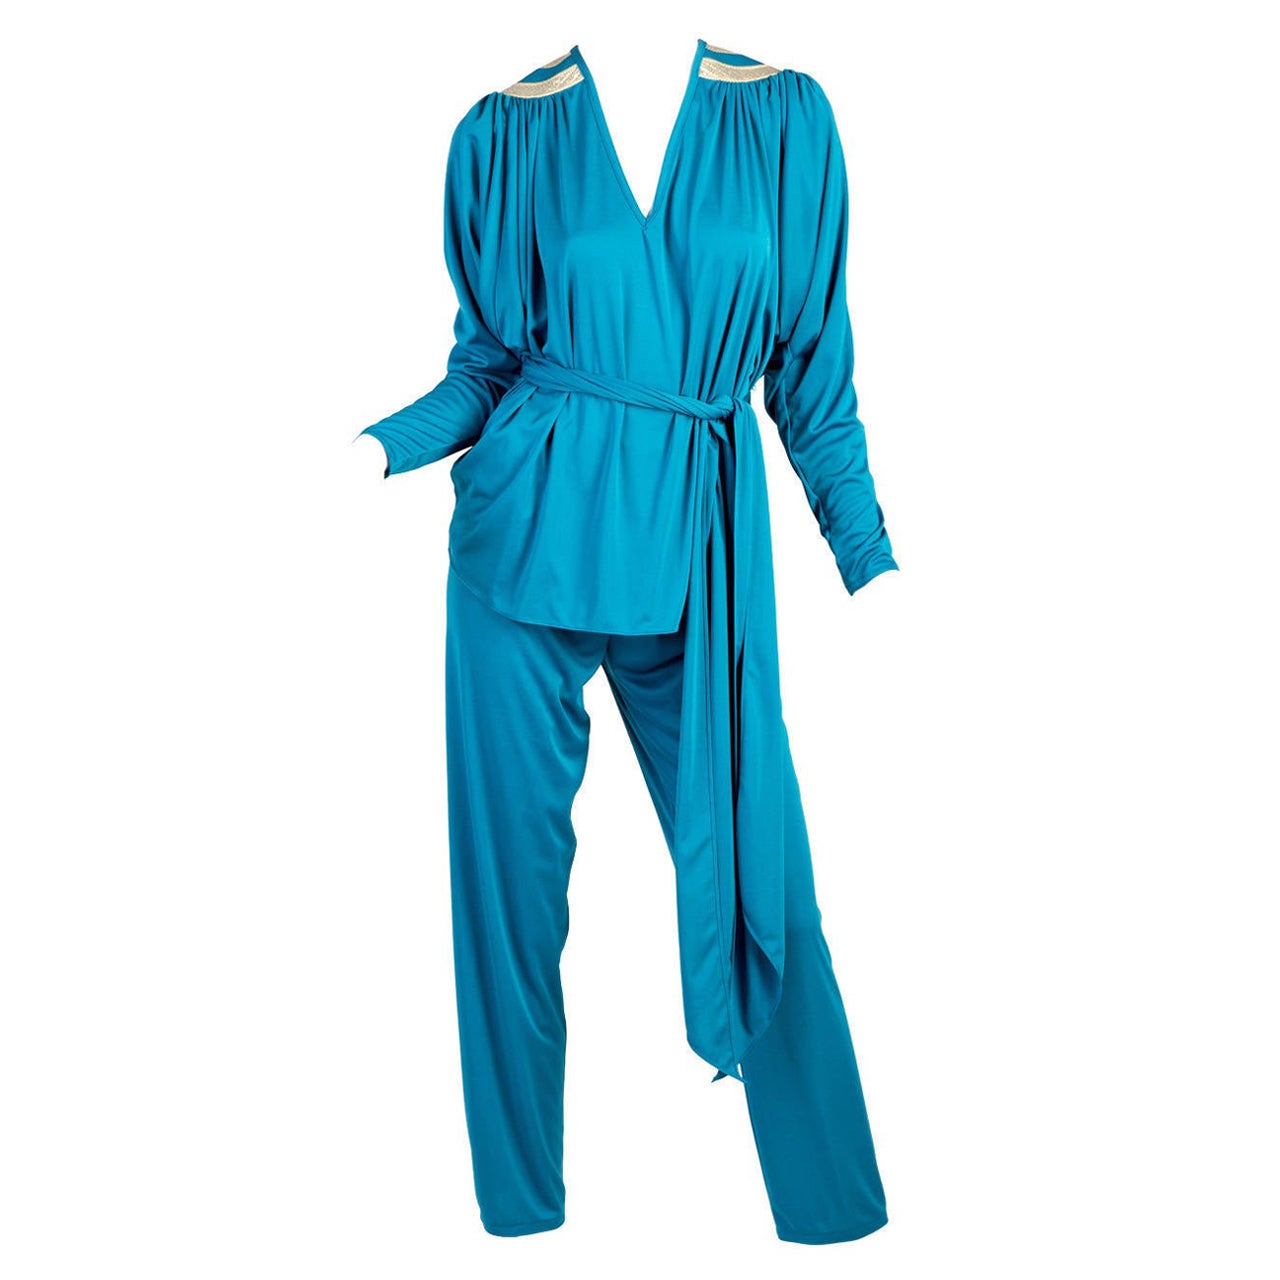 1970s Bill Tice Turquoise & Gold Gathered Jersey Dolman Sleeve Top & Pants Set  For Sale